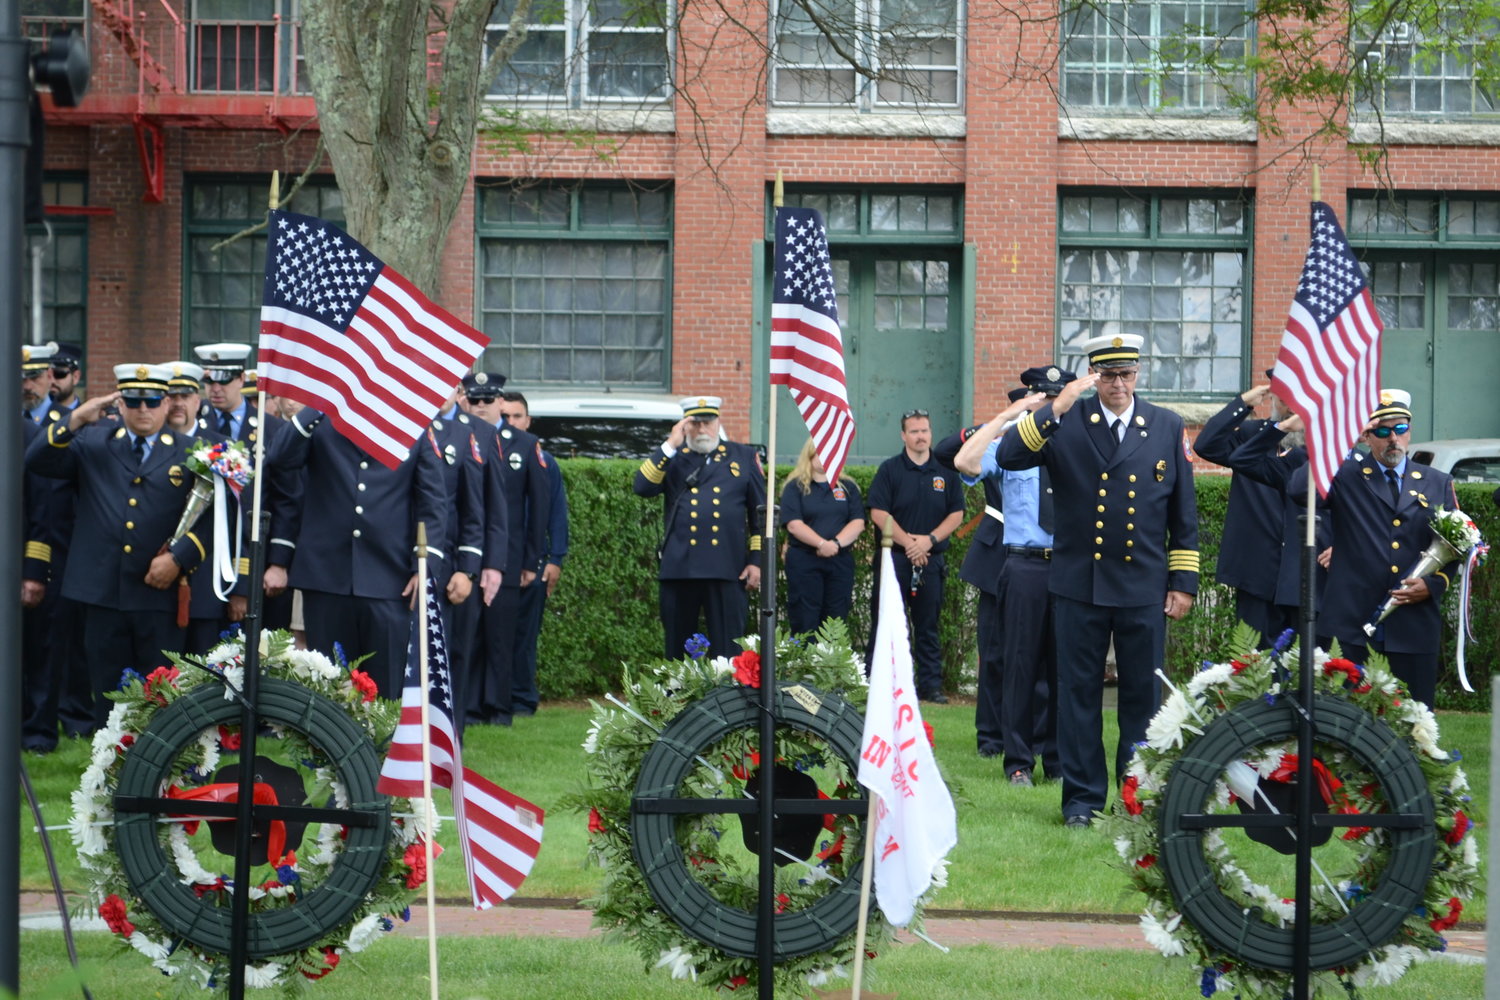 Firefighters salute during the wreath dedication ceremony at Firemen’s Memorial Park on Sunday.